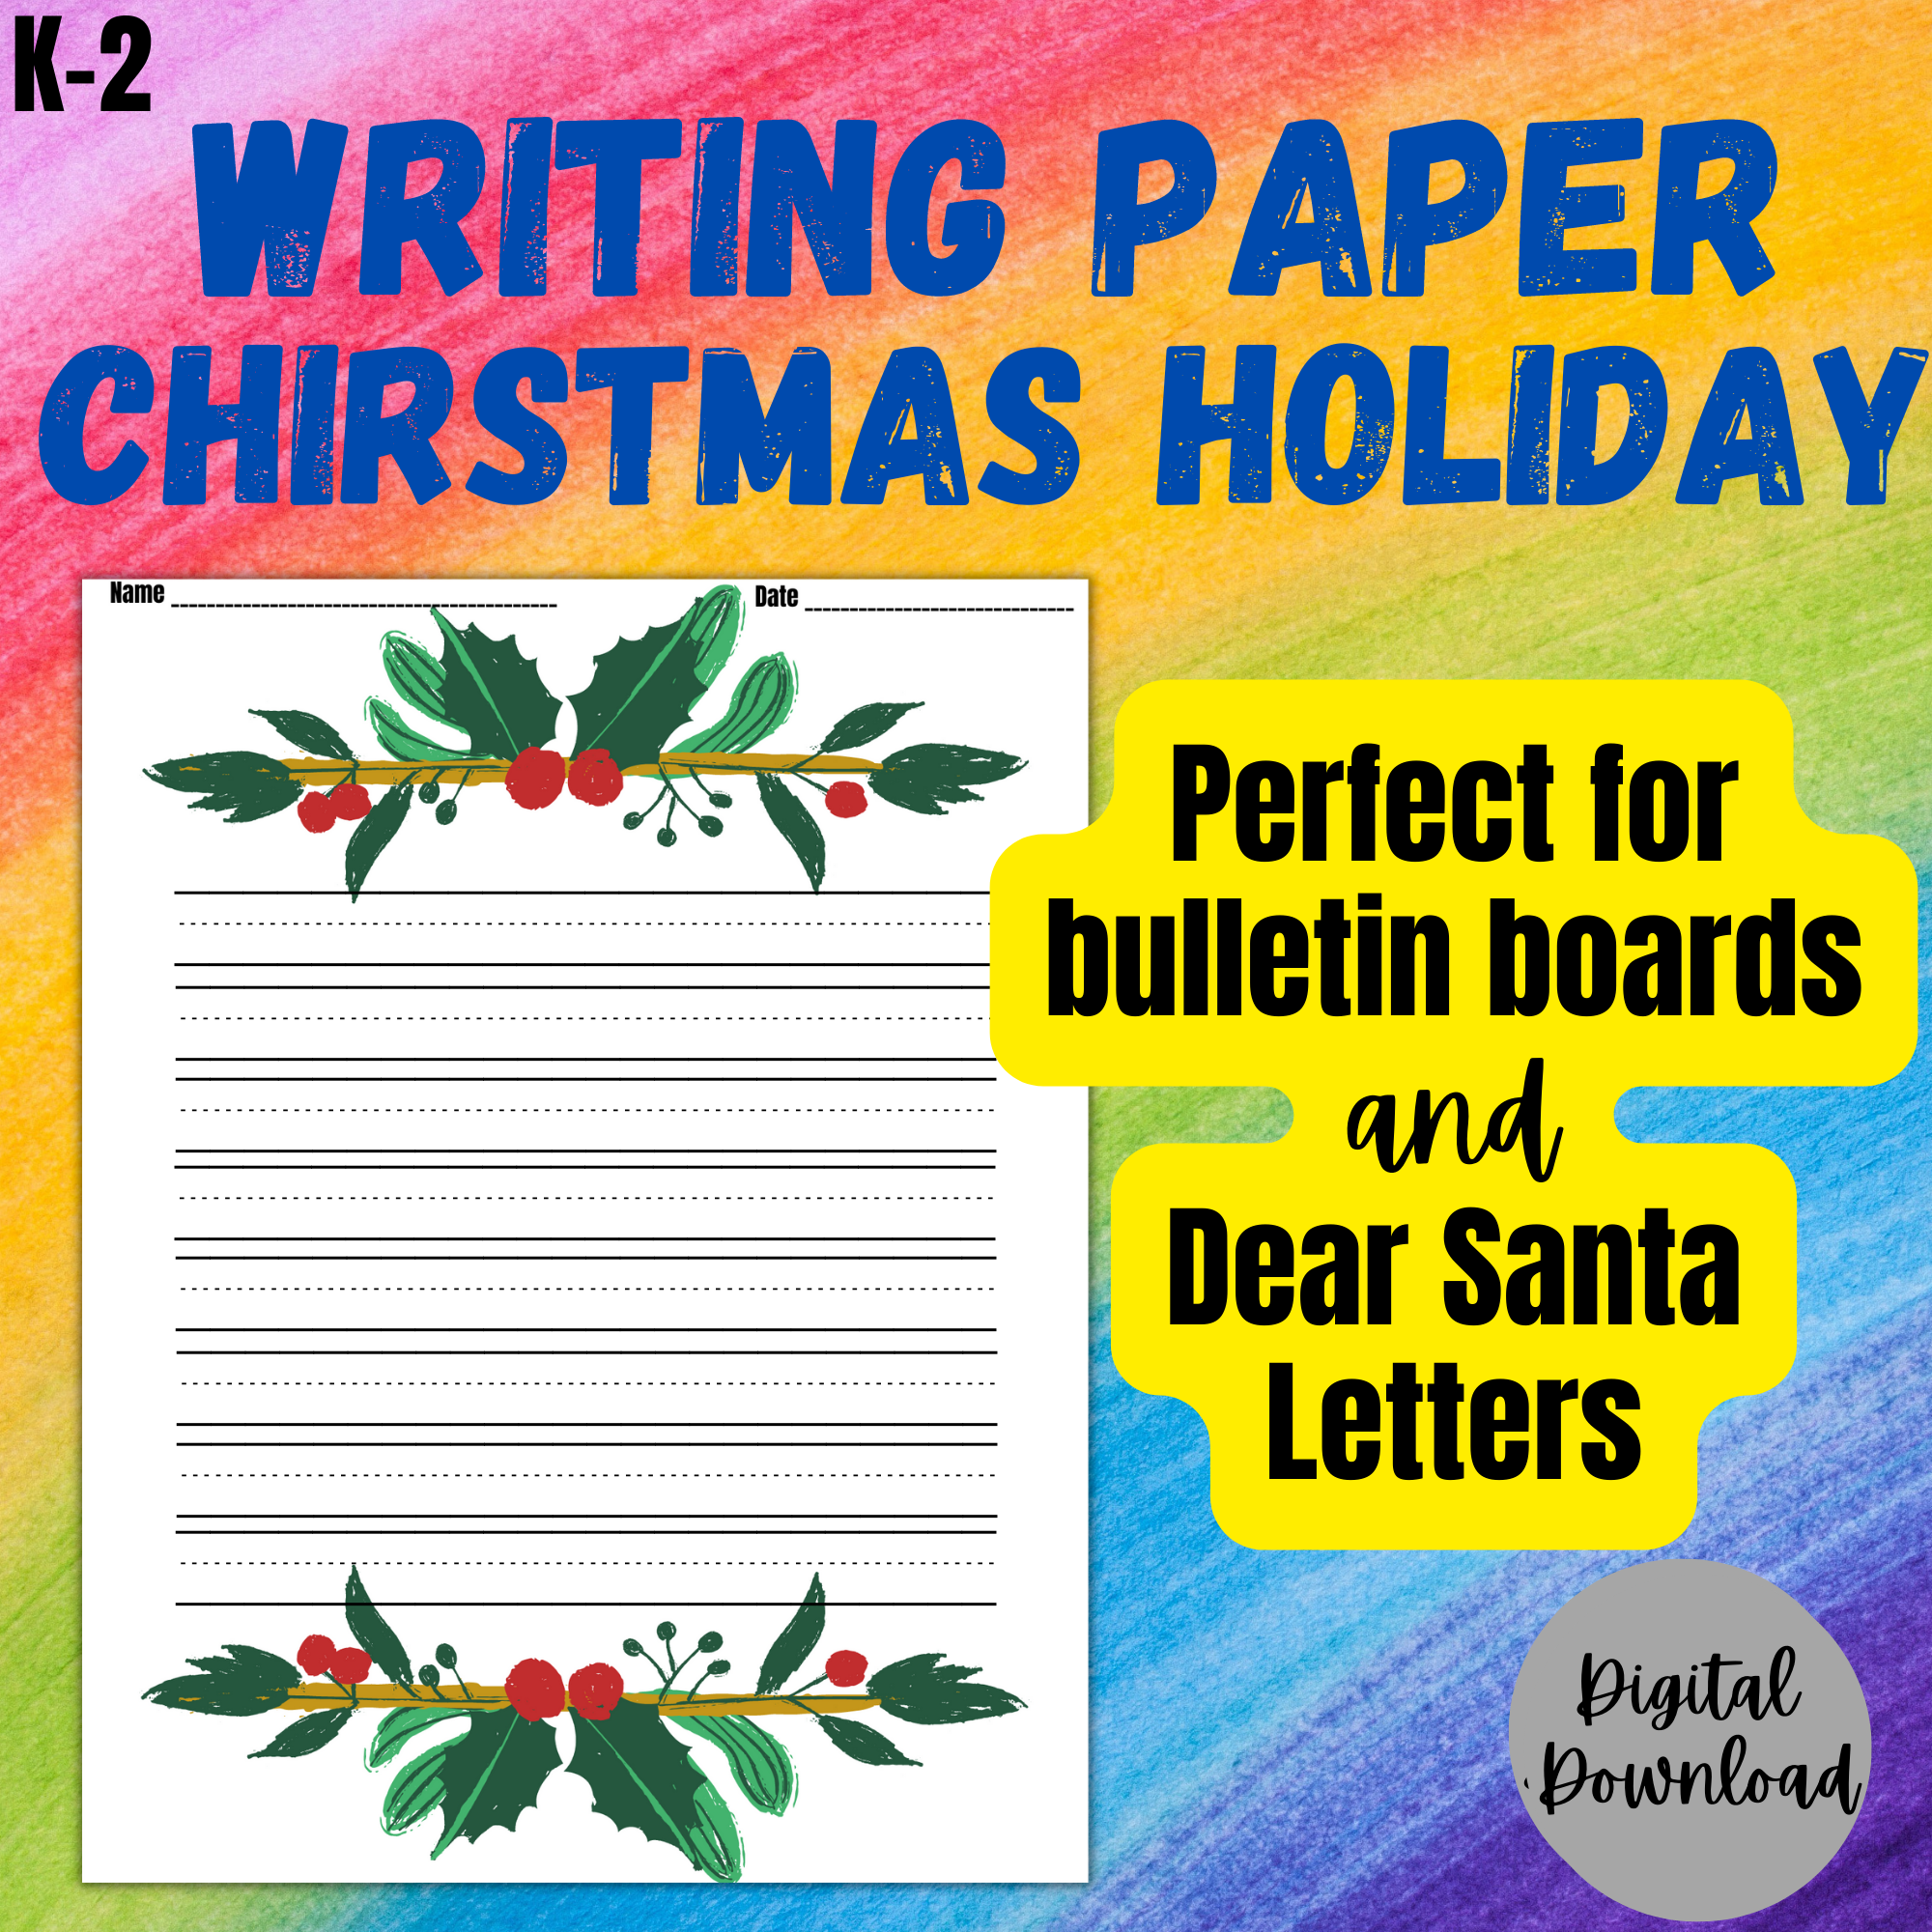 Christmas Holiday Writing Paper perfect for Bulletin Boards and Dear Santa Letters